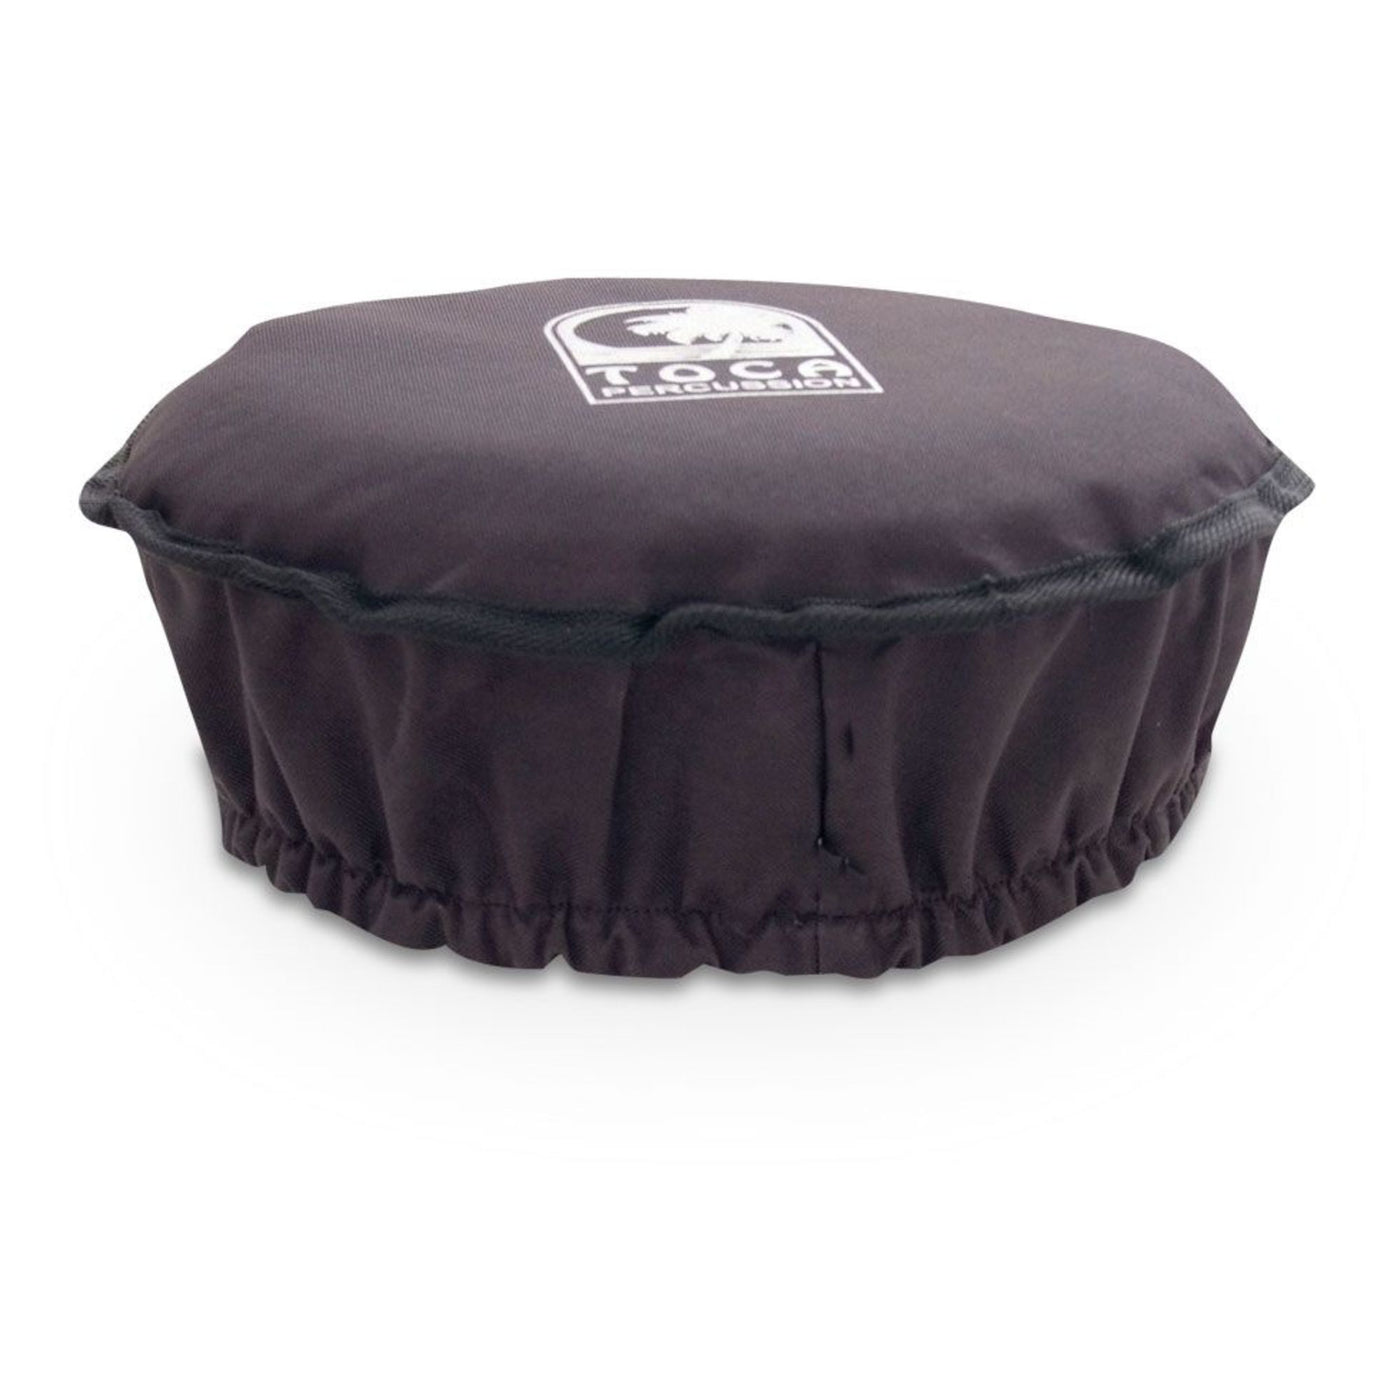 Toca Padded Djembe Hat Cover, 14"